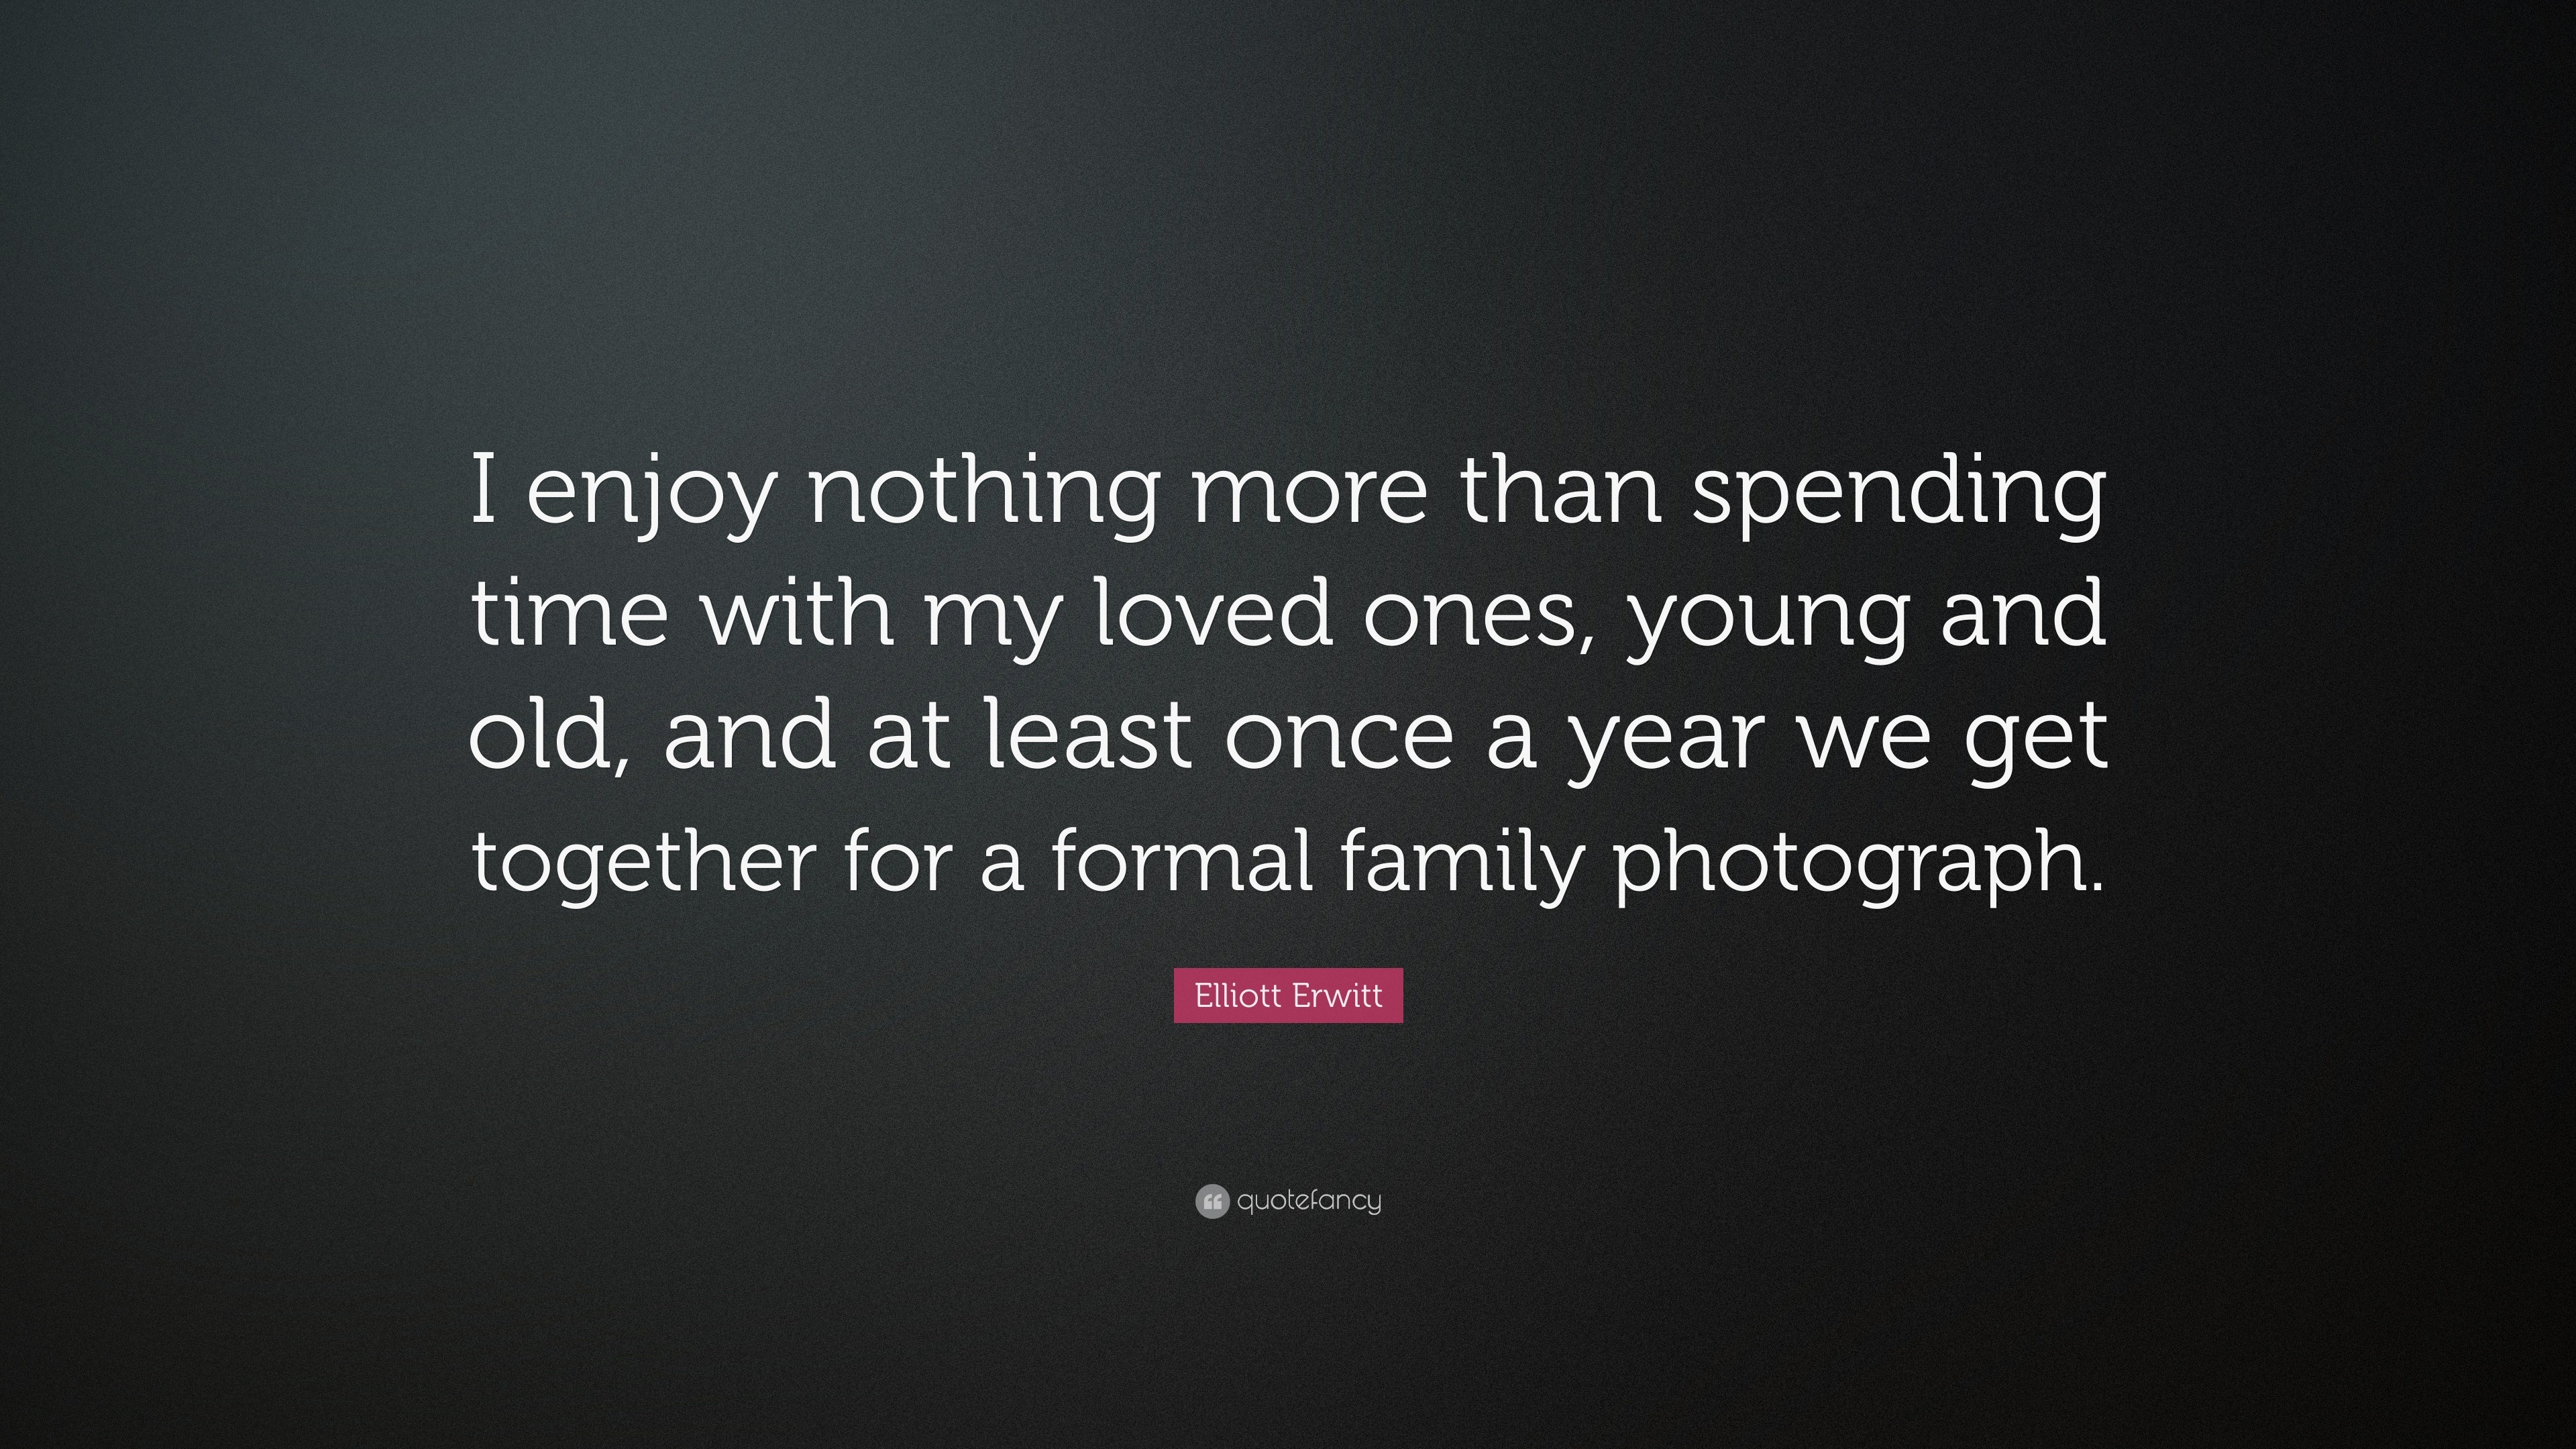 Elliott Erwitt Quote “I enjoy nothing more than spending time with my loved ones